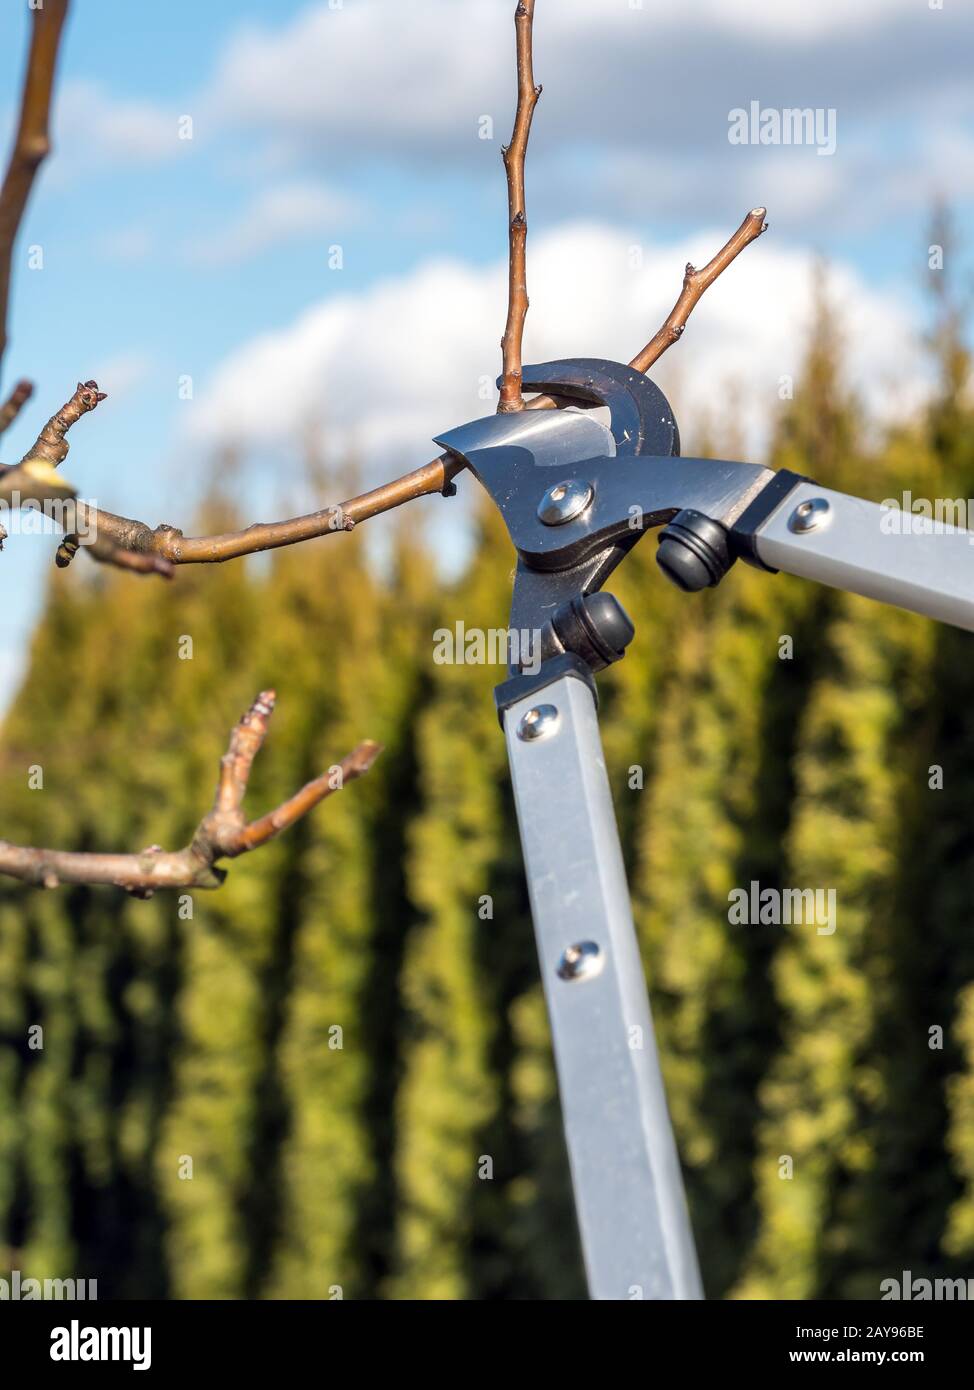 Shot of pruning shears used by gardener to prune fruit tree branches Stock Photo